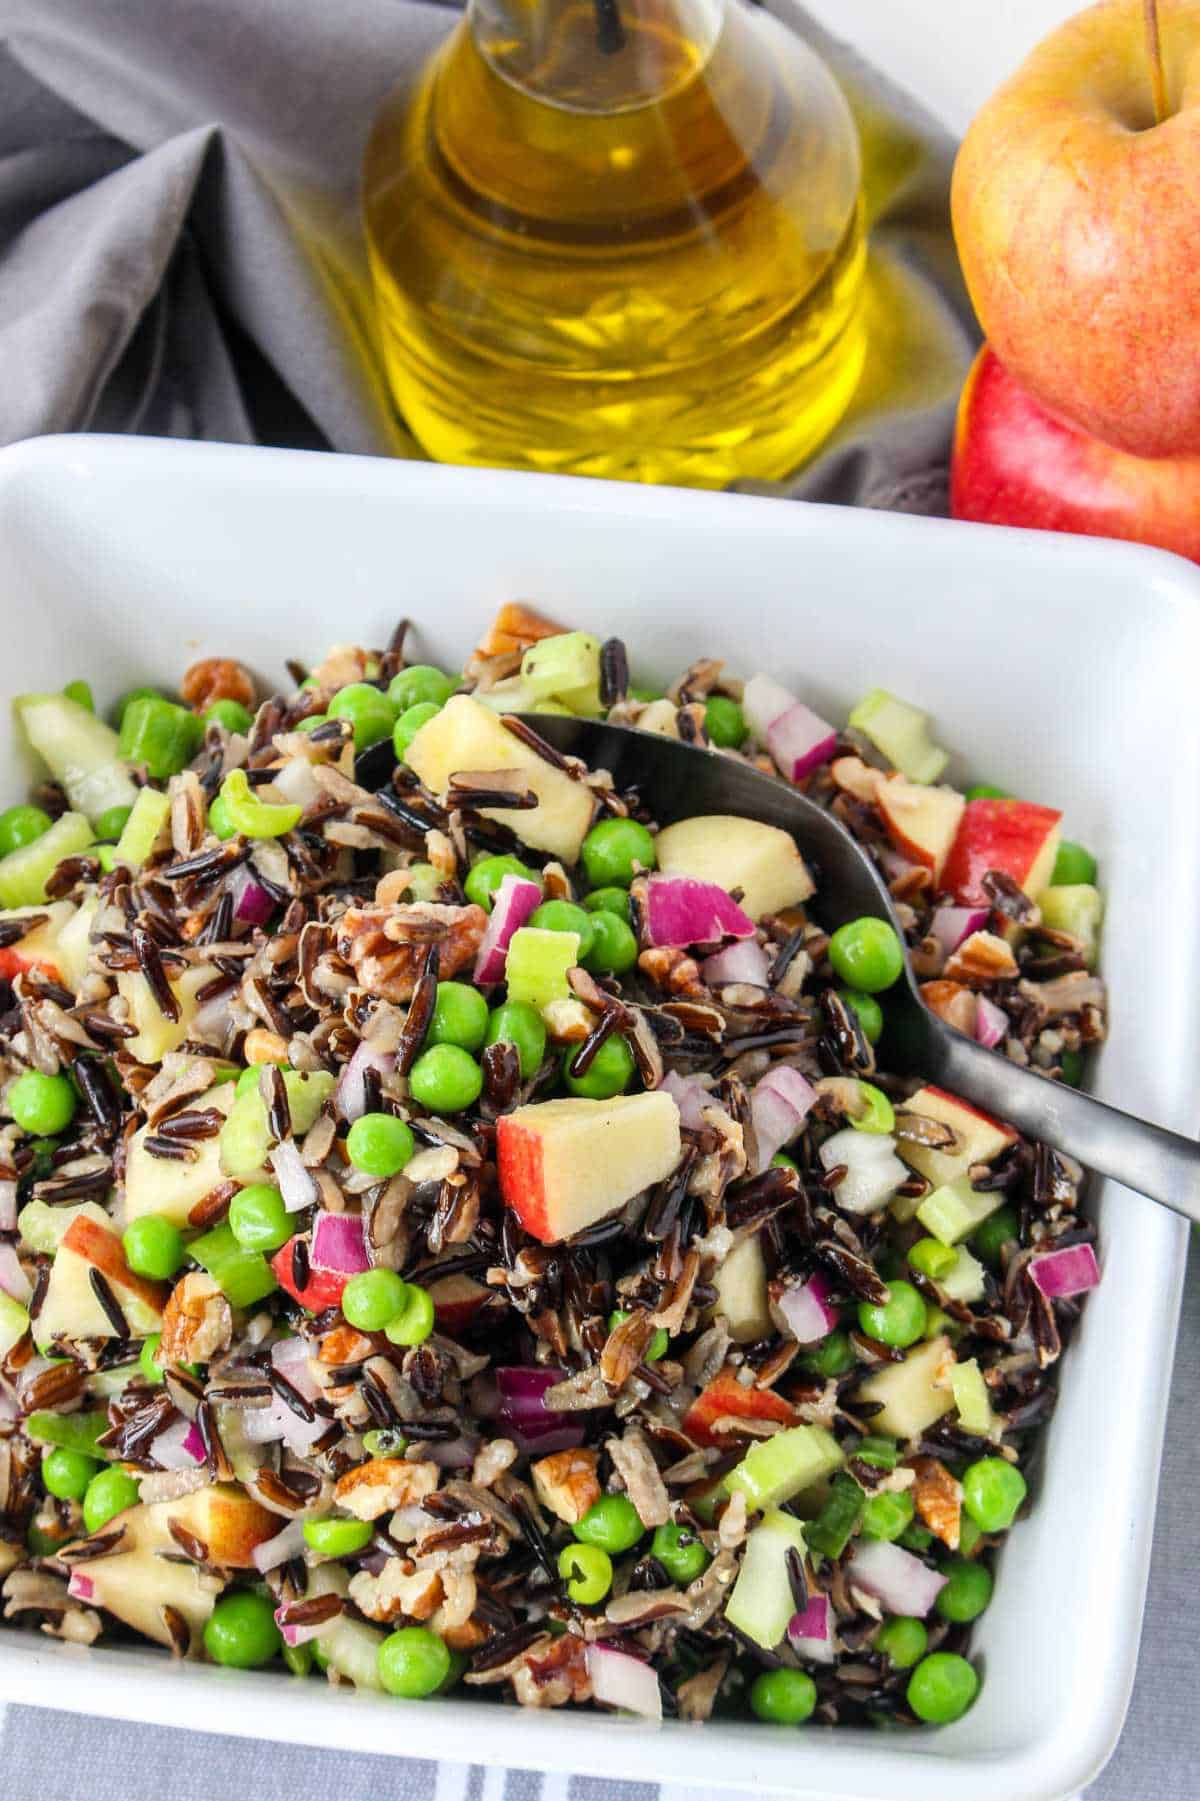 Serving bowl of wild rice salad on a white background with apples and olive oil nearby.